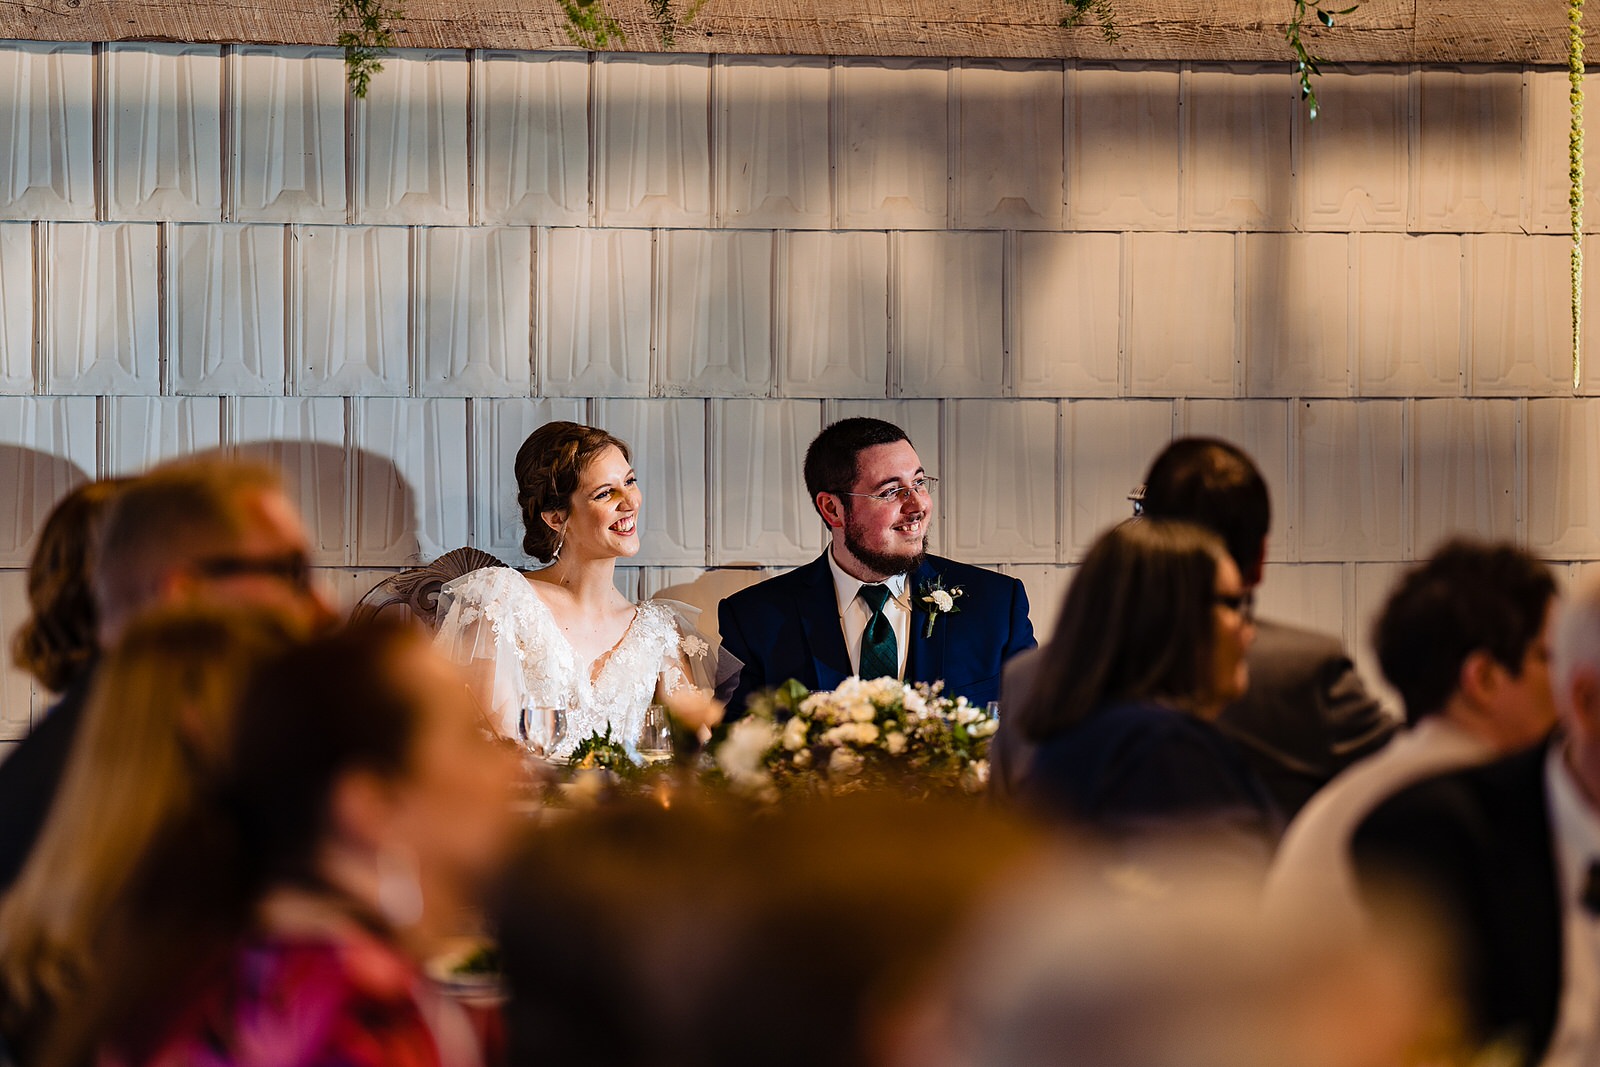 Bride and groom react to toasts from the sweetheart table at The Meadows Raleigh wedding reception